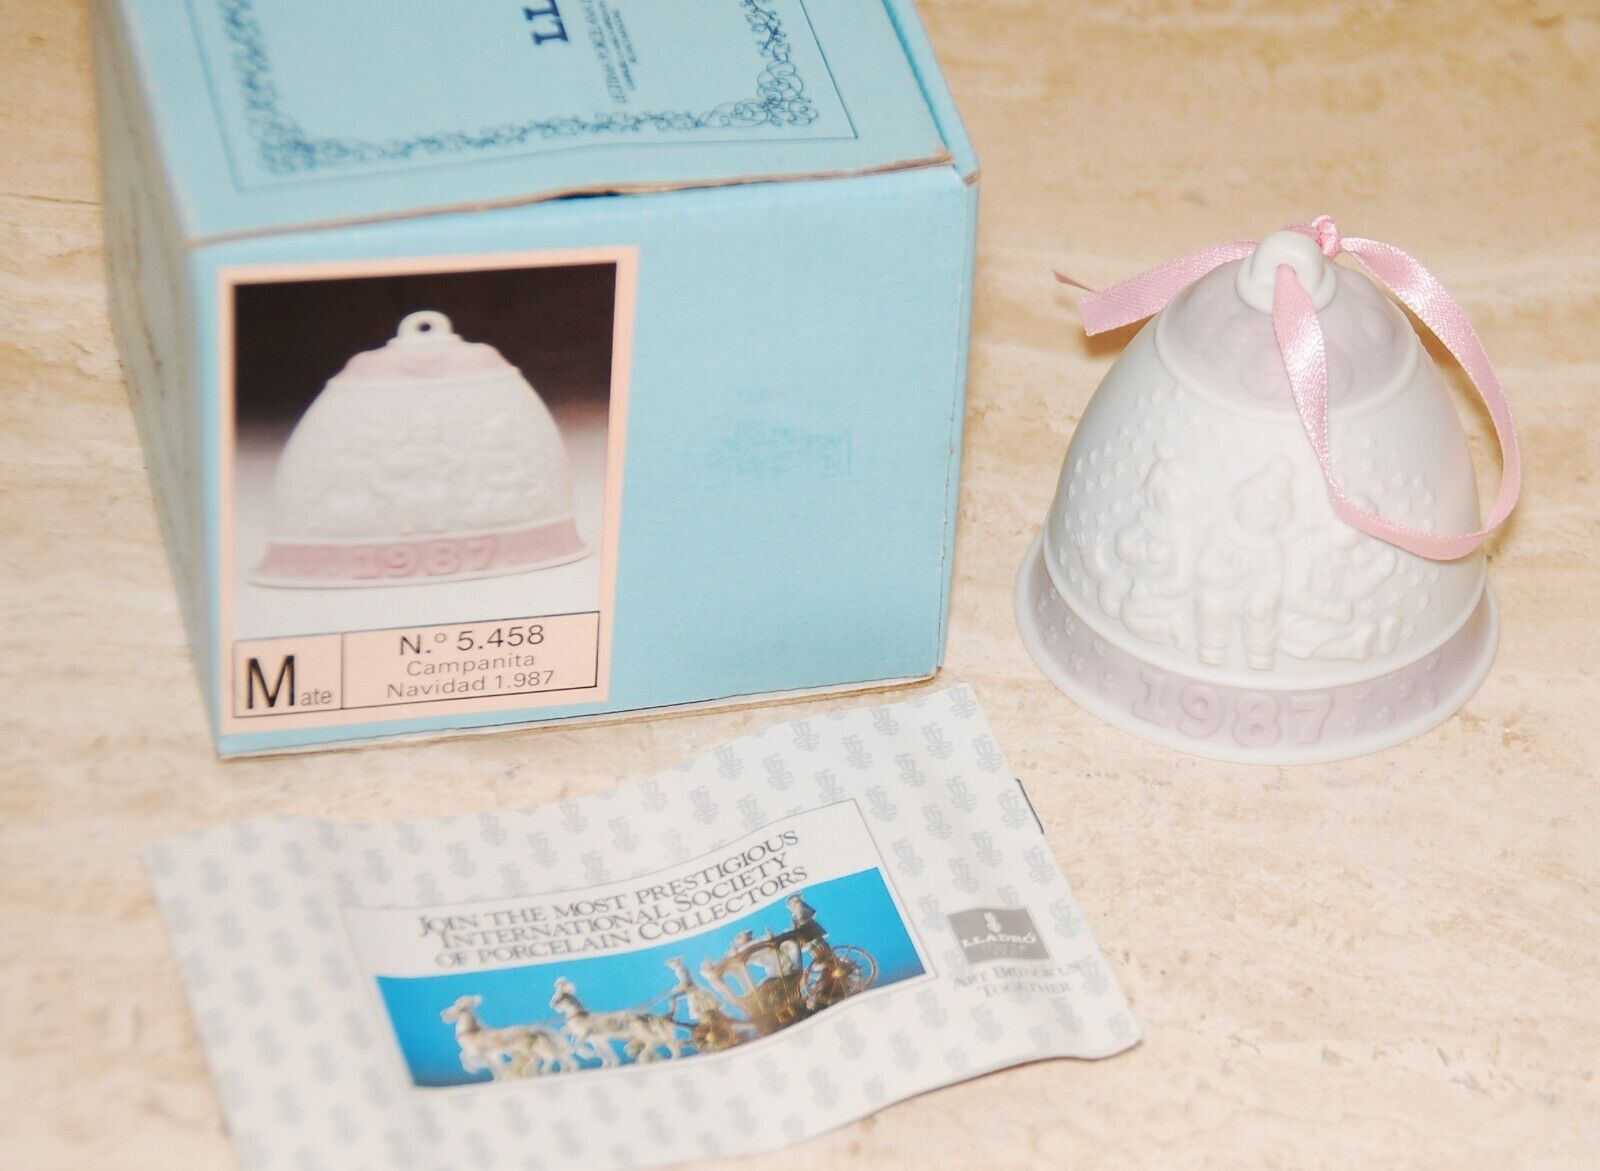 Lladró 1987 Limited Edition Lladro Annual Porcelain Christmas Bell - 5.458